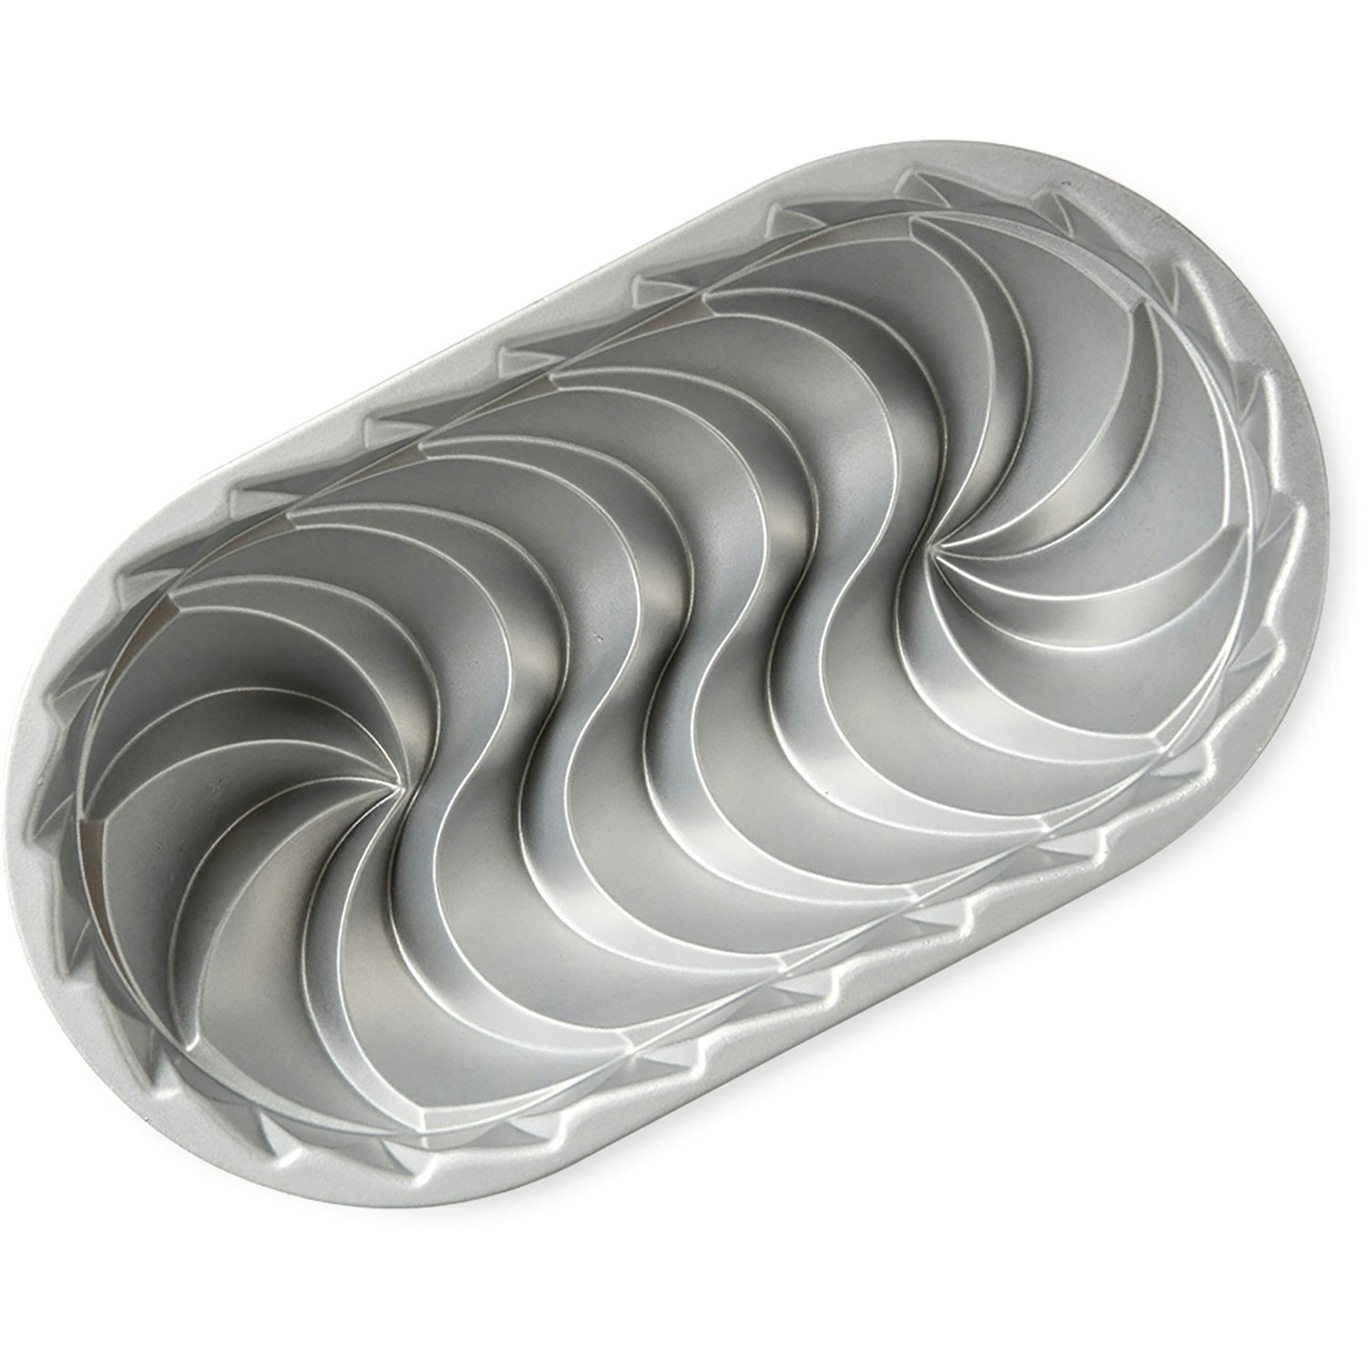 Nordic Ware 11 in Loaf Pans